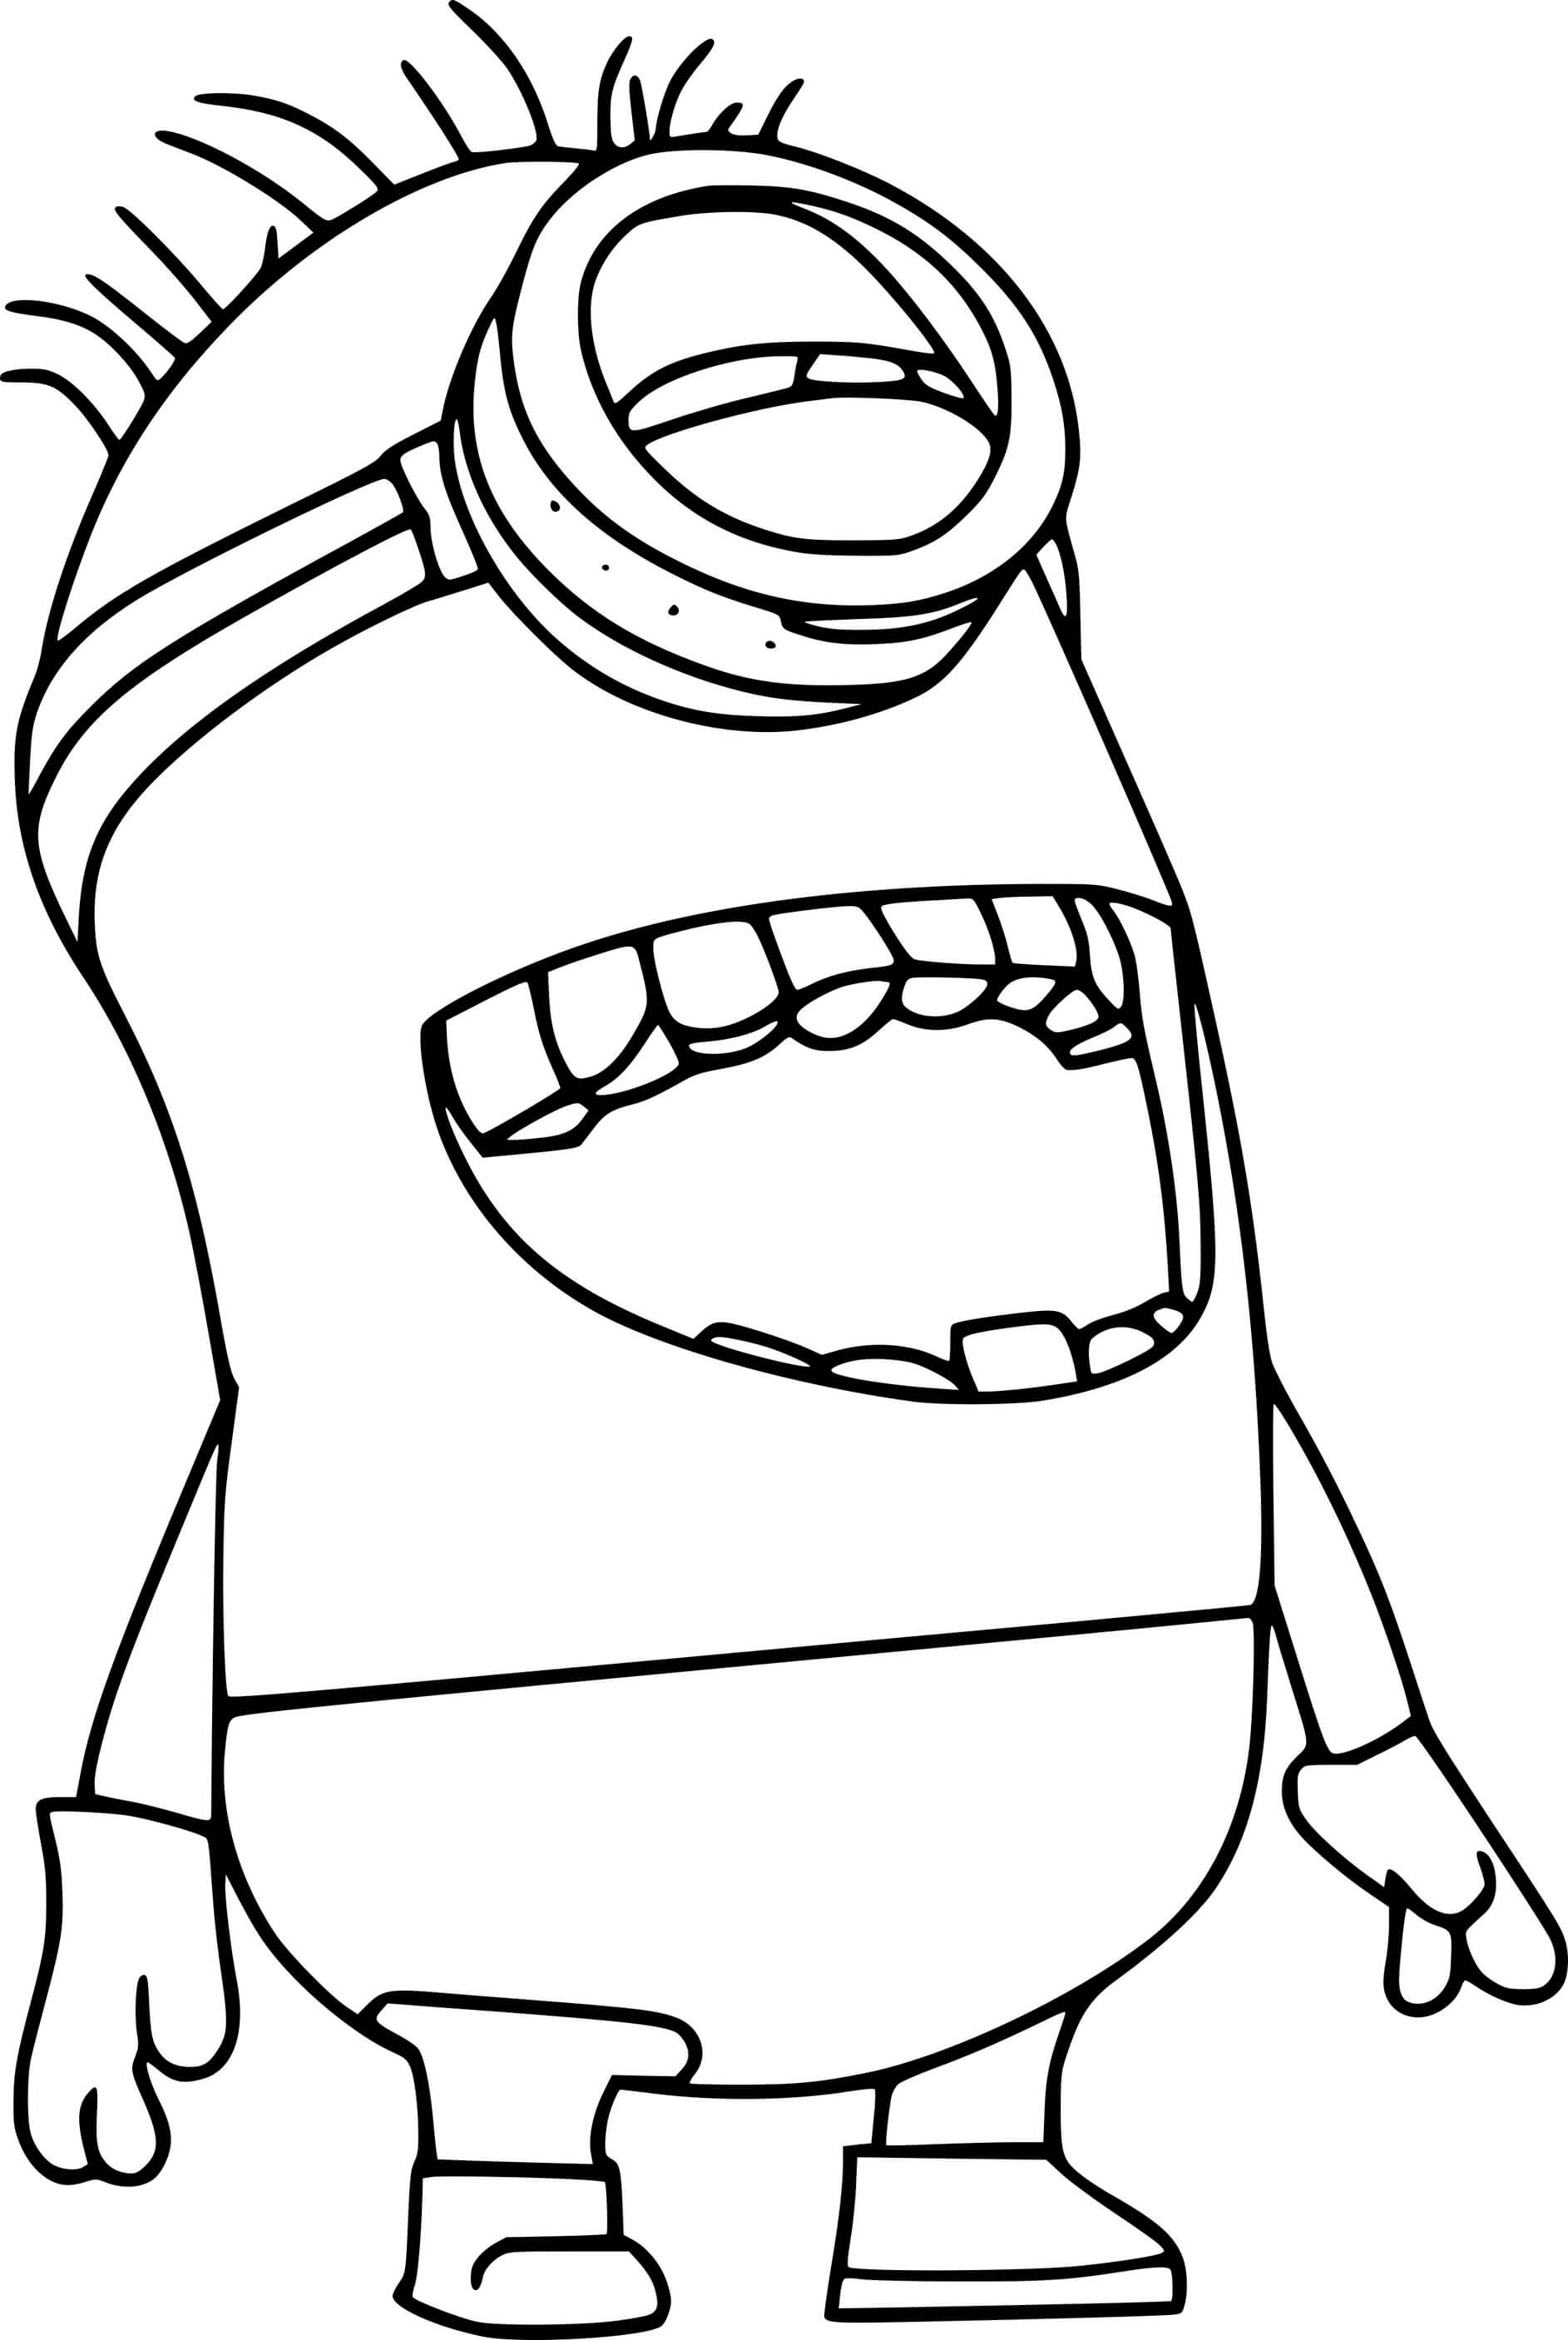 One Eye Minion Laughing Coloring Page